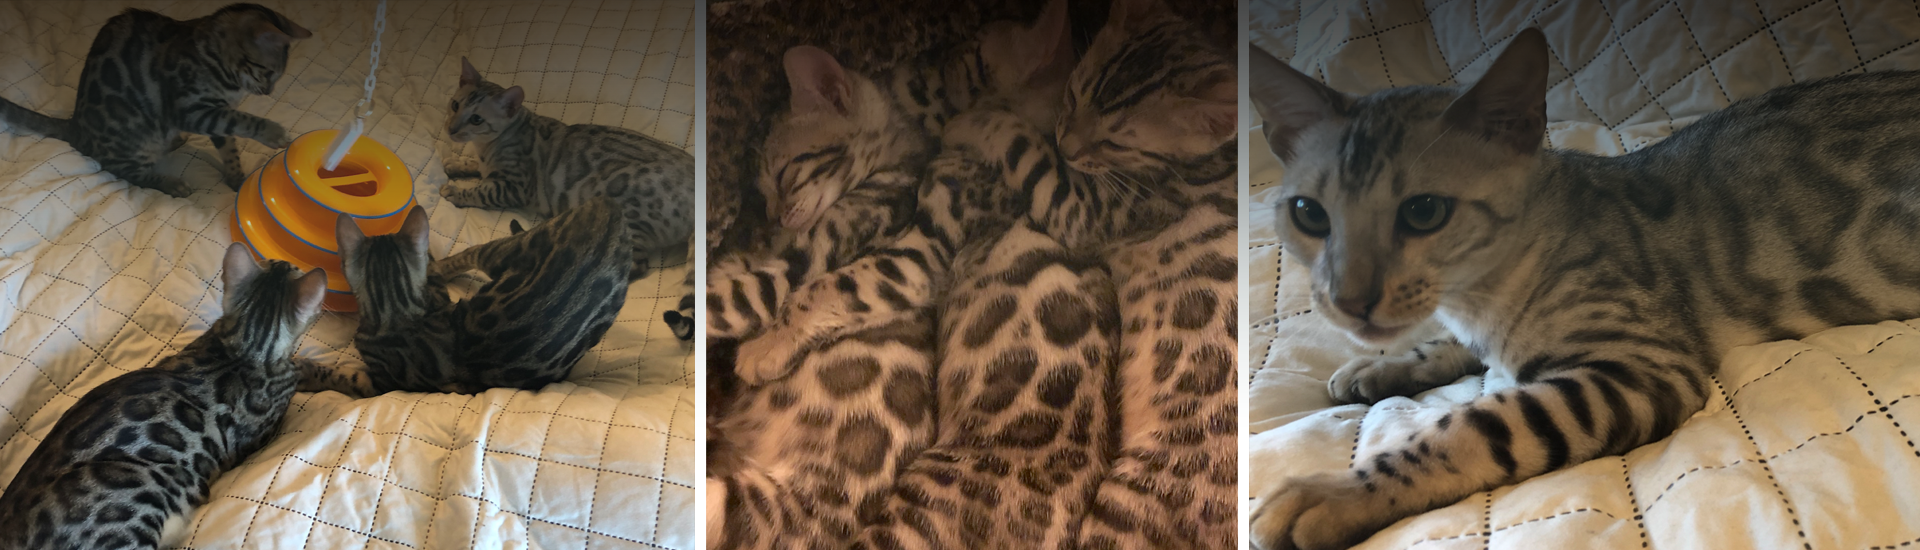 Bengal Kittens Playing and Relaxing